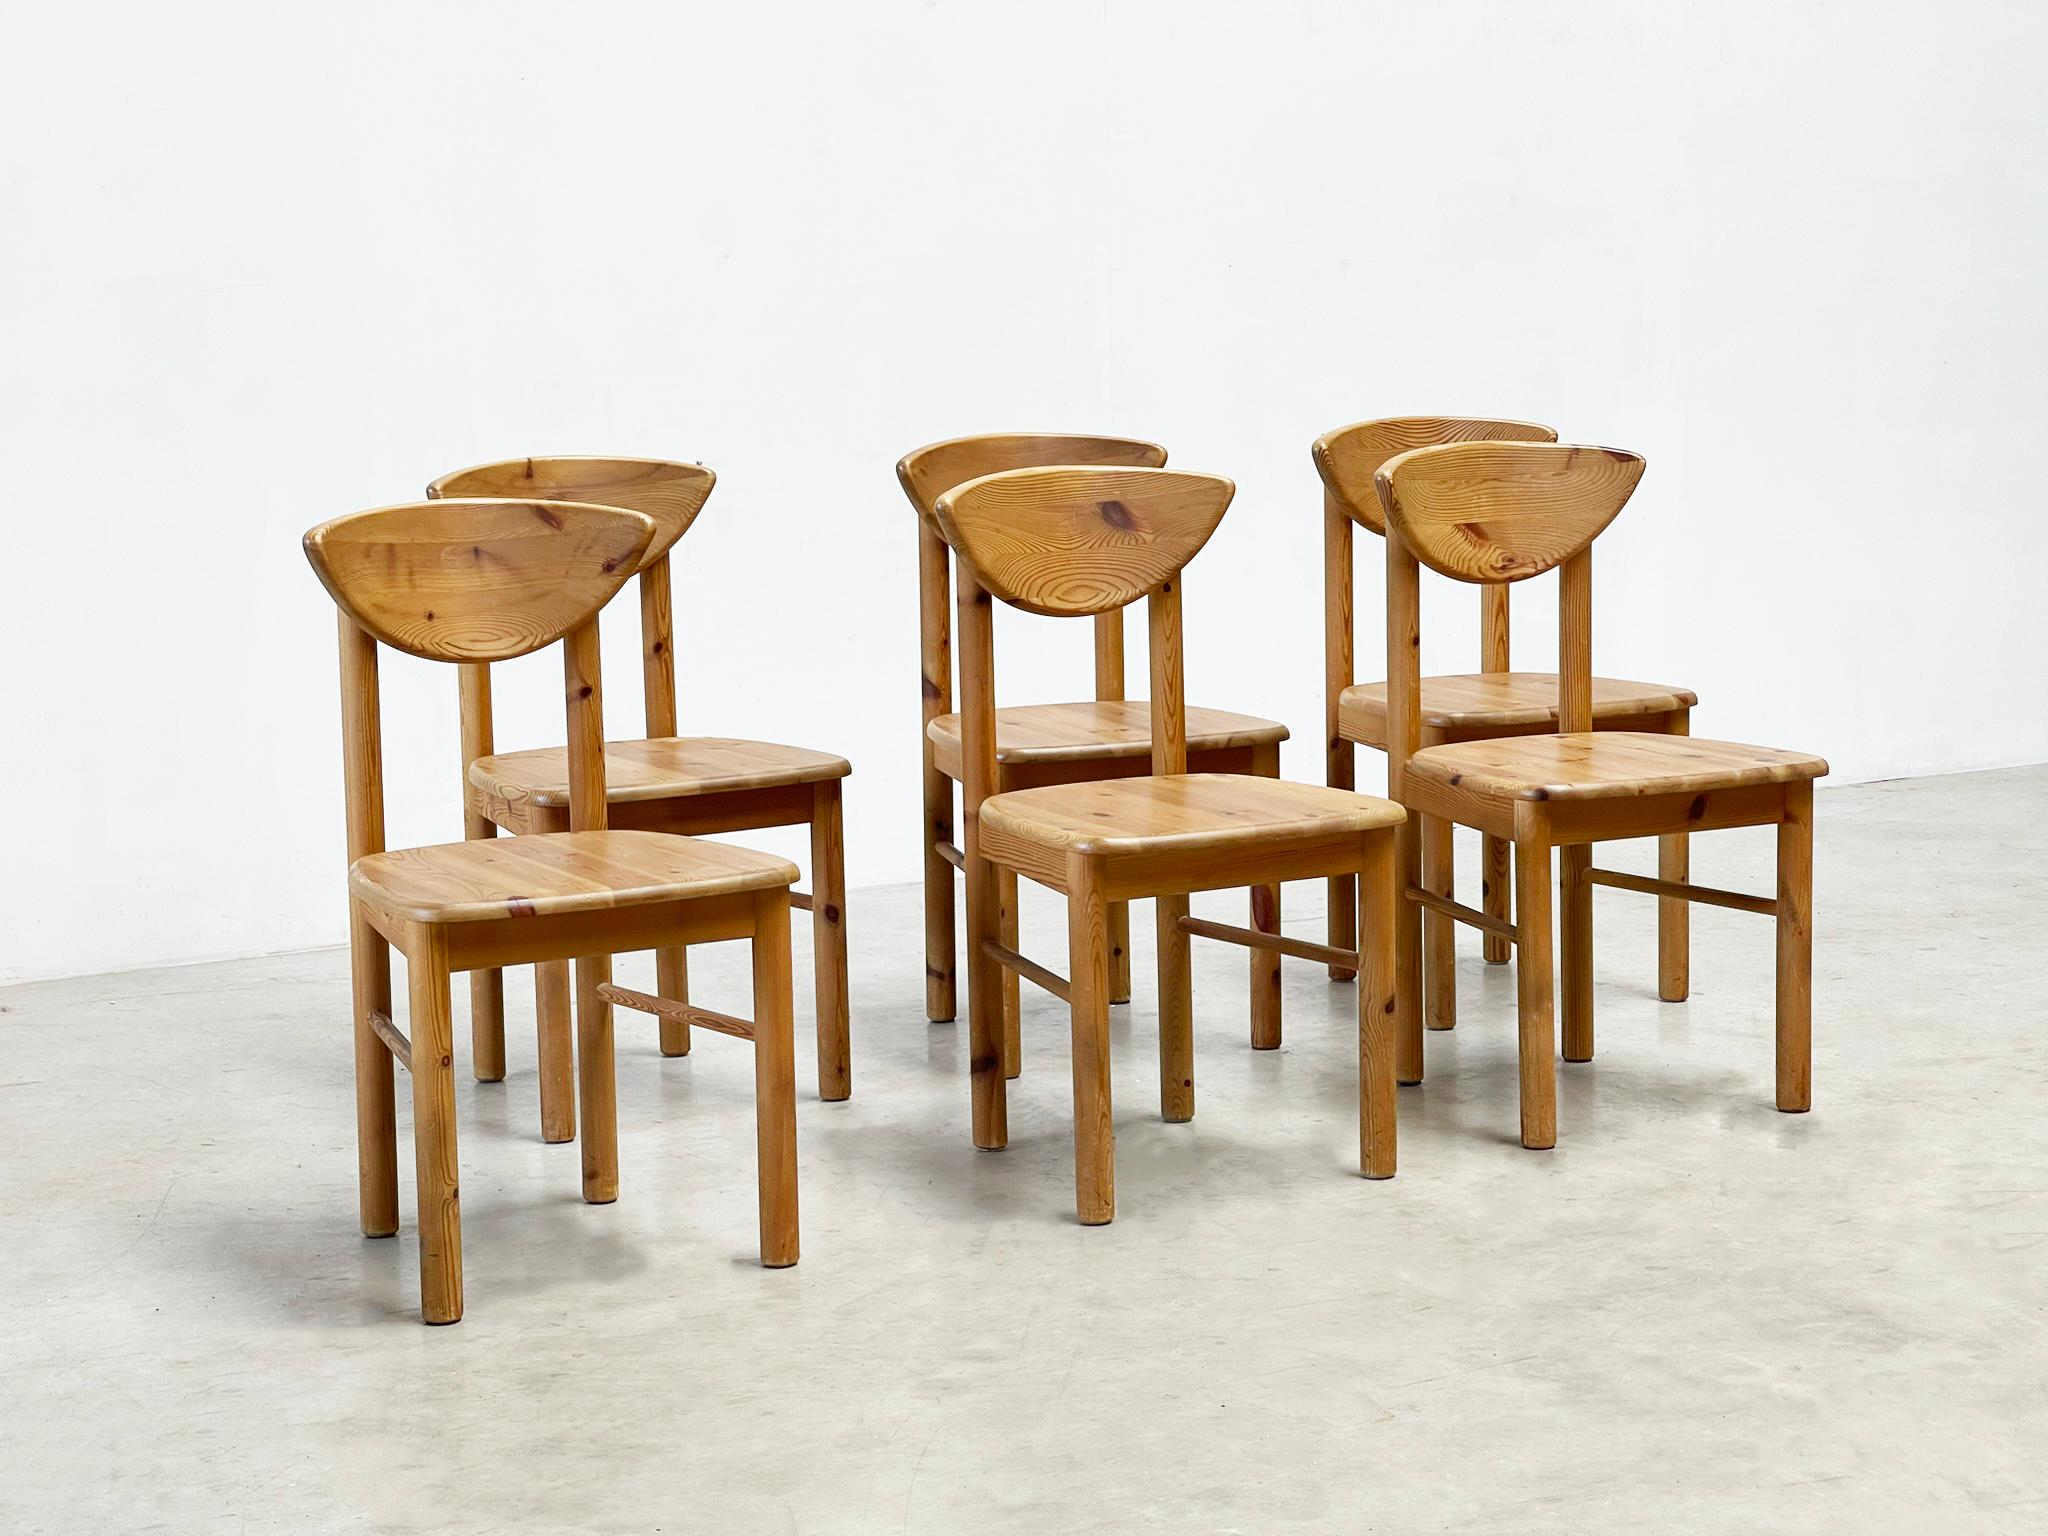 Set of 6 rustic and well known chairs by Rainer Daumiller. Rainer Daumiller is known for his furniture in solid pine. These chairs were made by Hirtshals Sawmill, Denmark The set is in very good condition. This kind of furniture is becoming more and